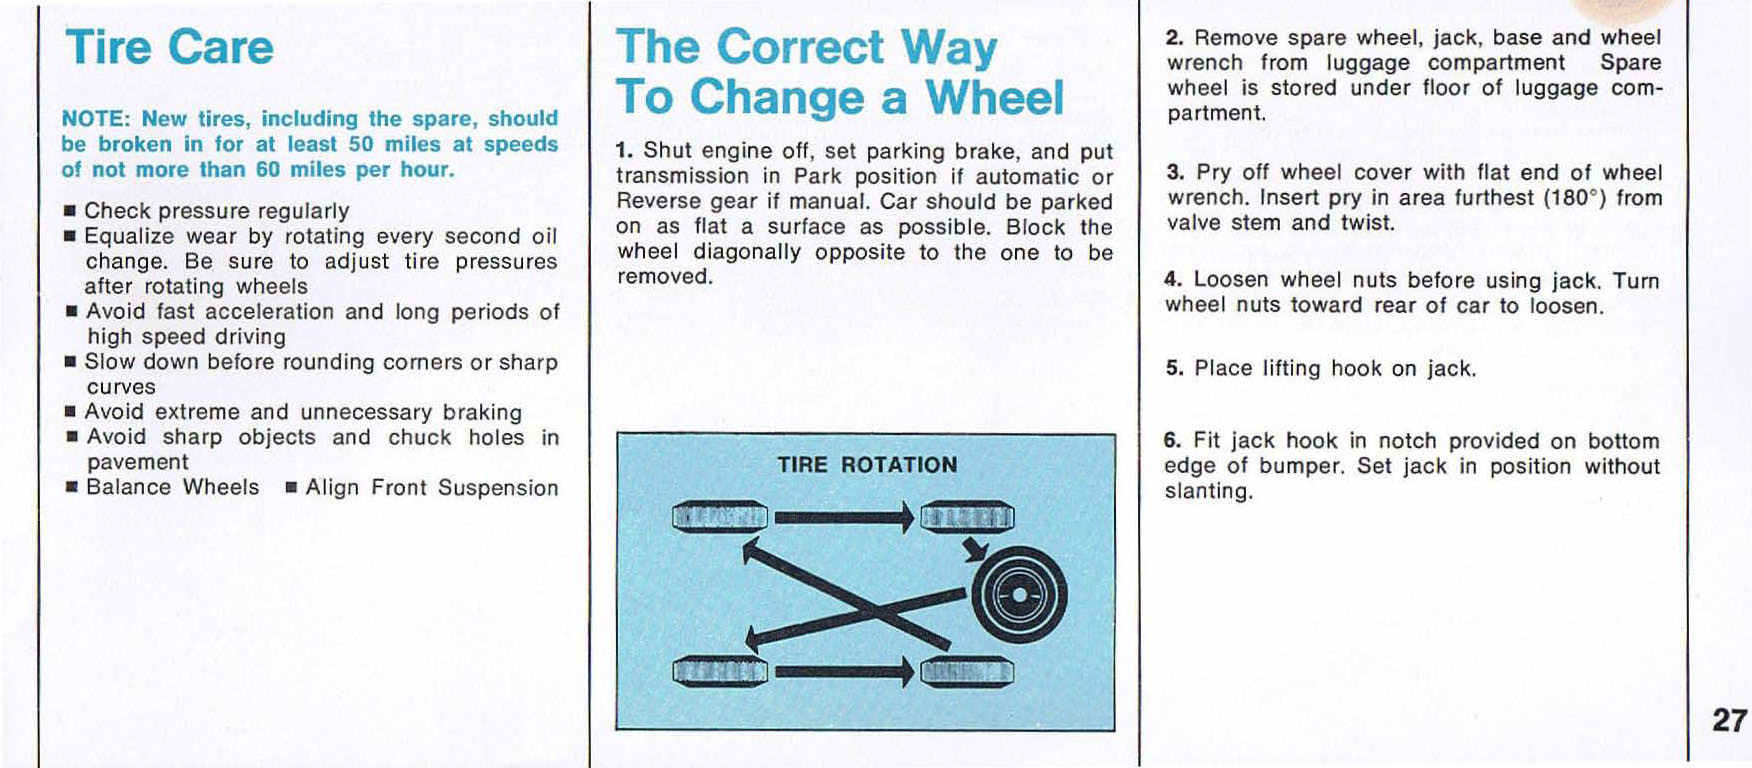 1969_Plymouth_Valiant_Owners_Manual-27